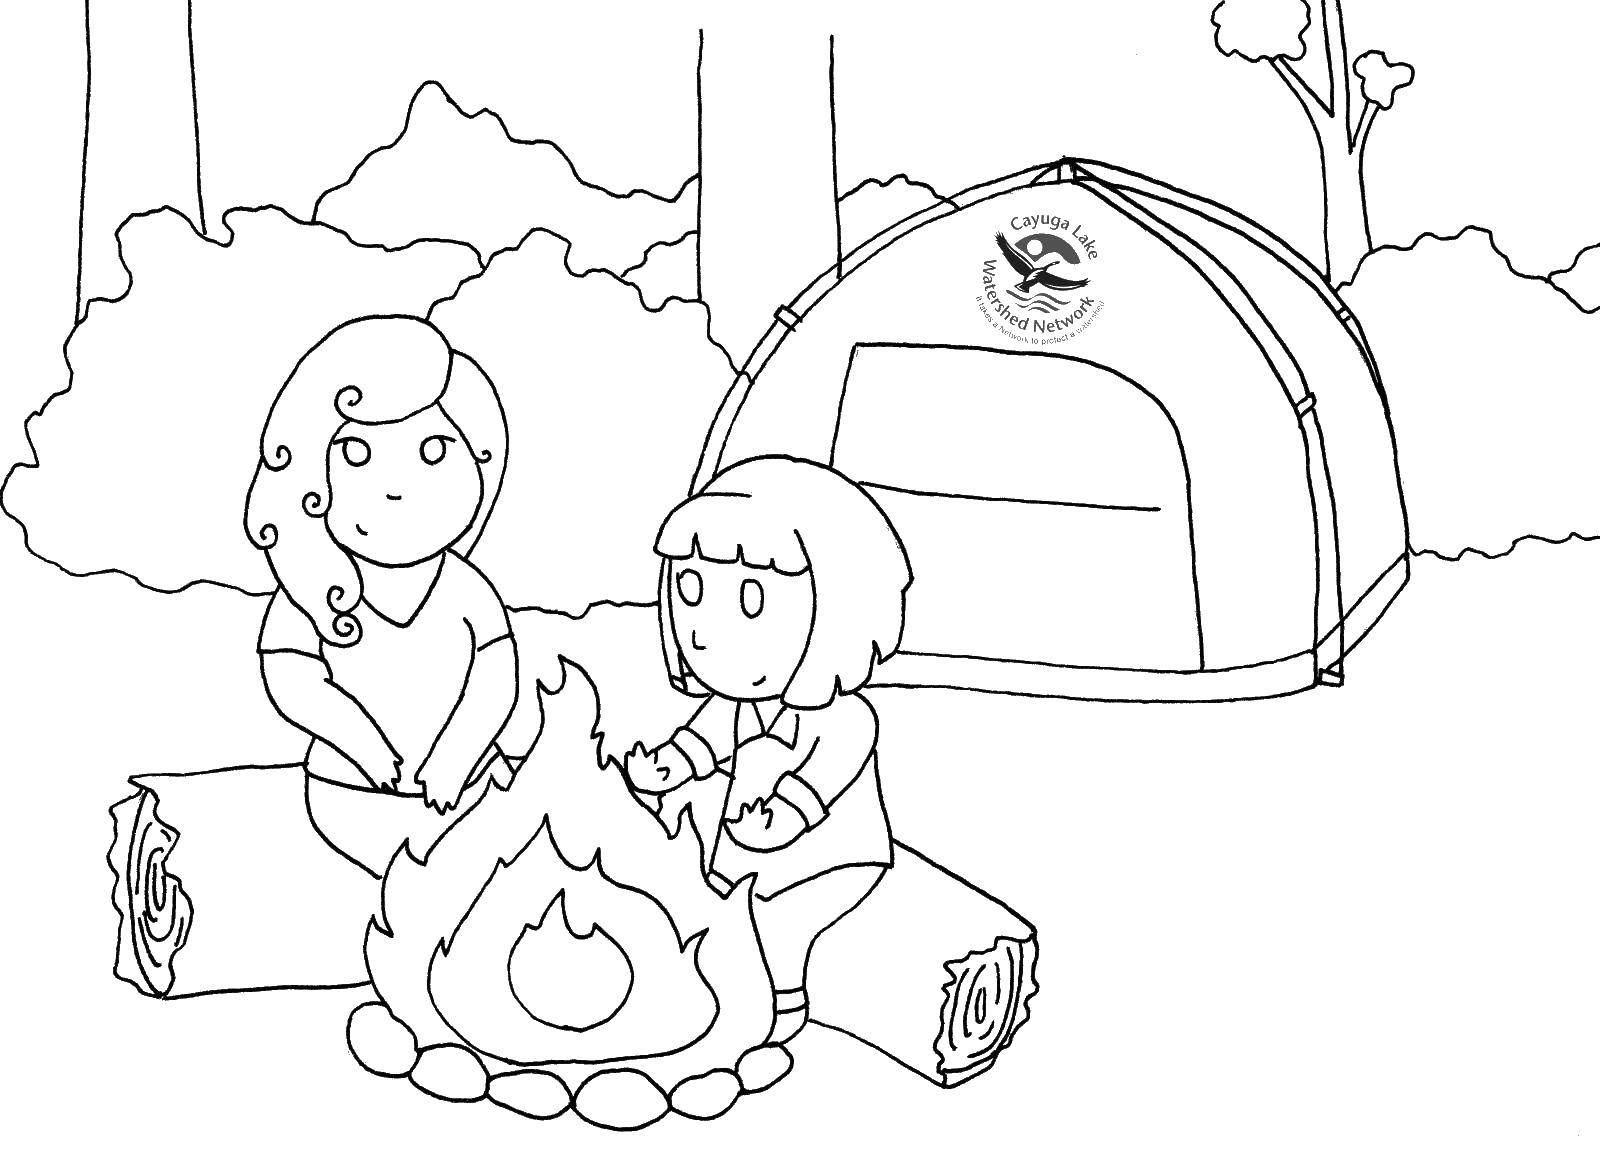 Coloring Mother and daughter in the tent. Category Camping. Tags:  mother, daughter, tent, campfire.